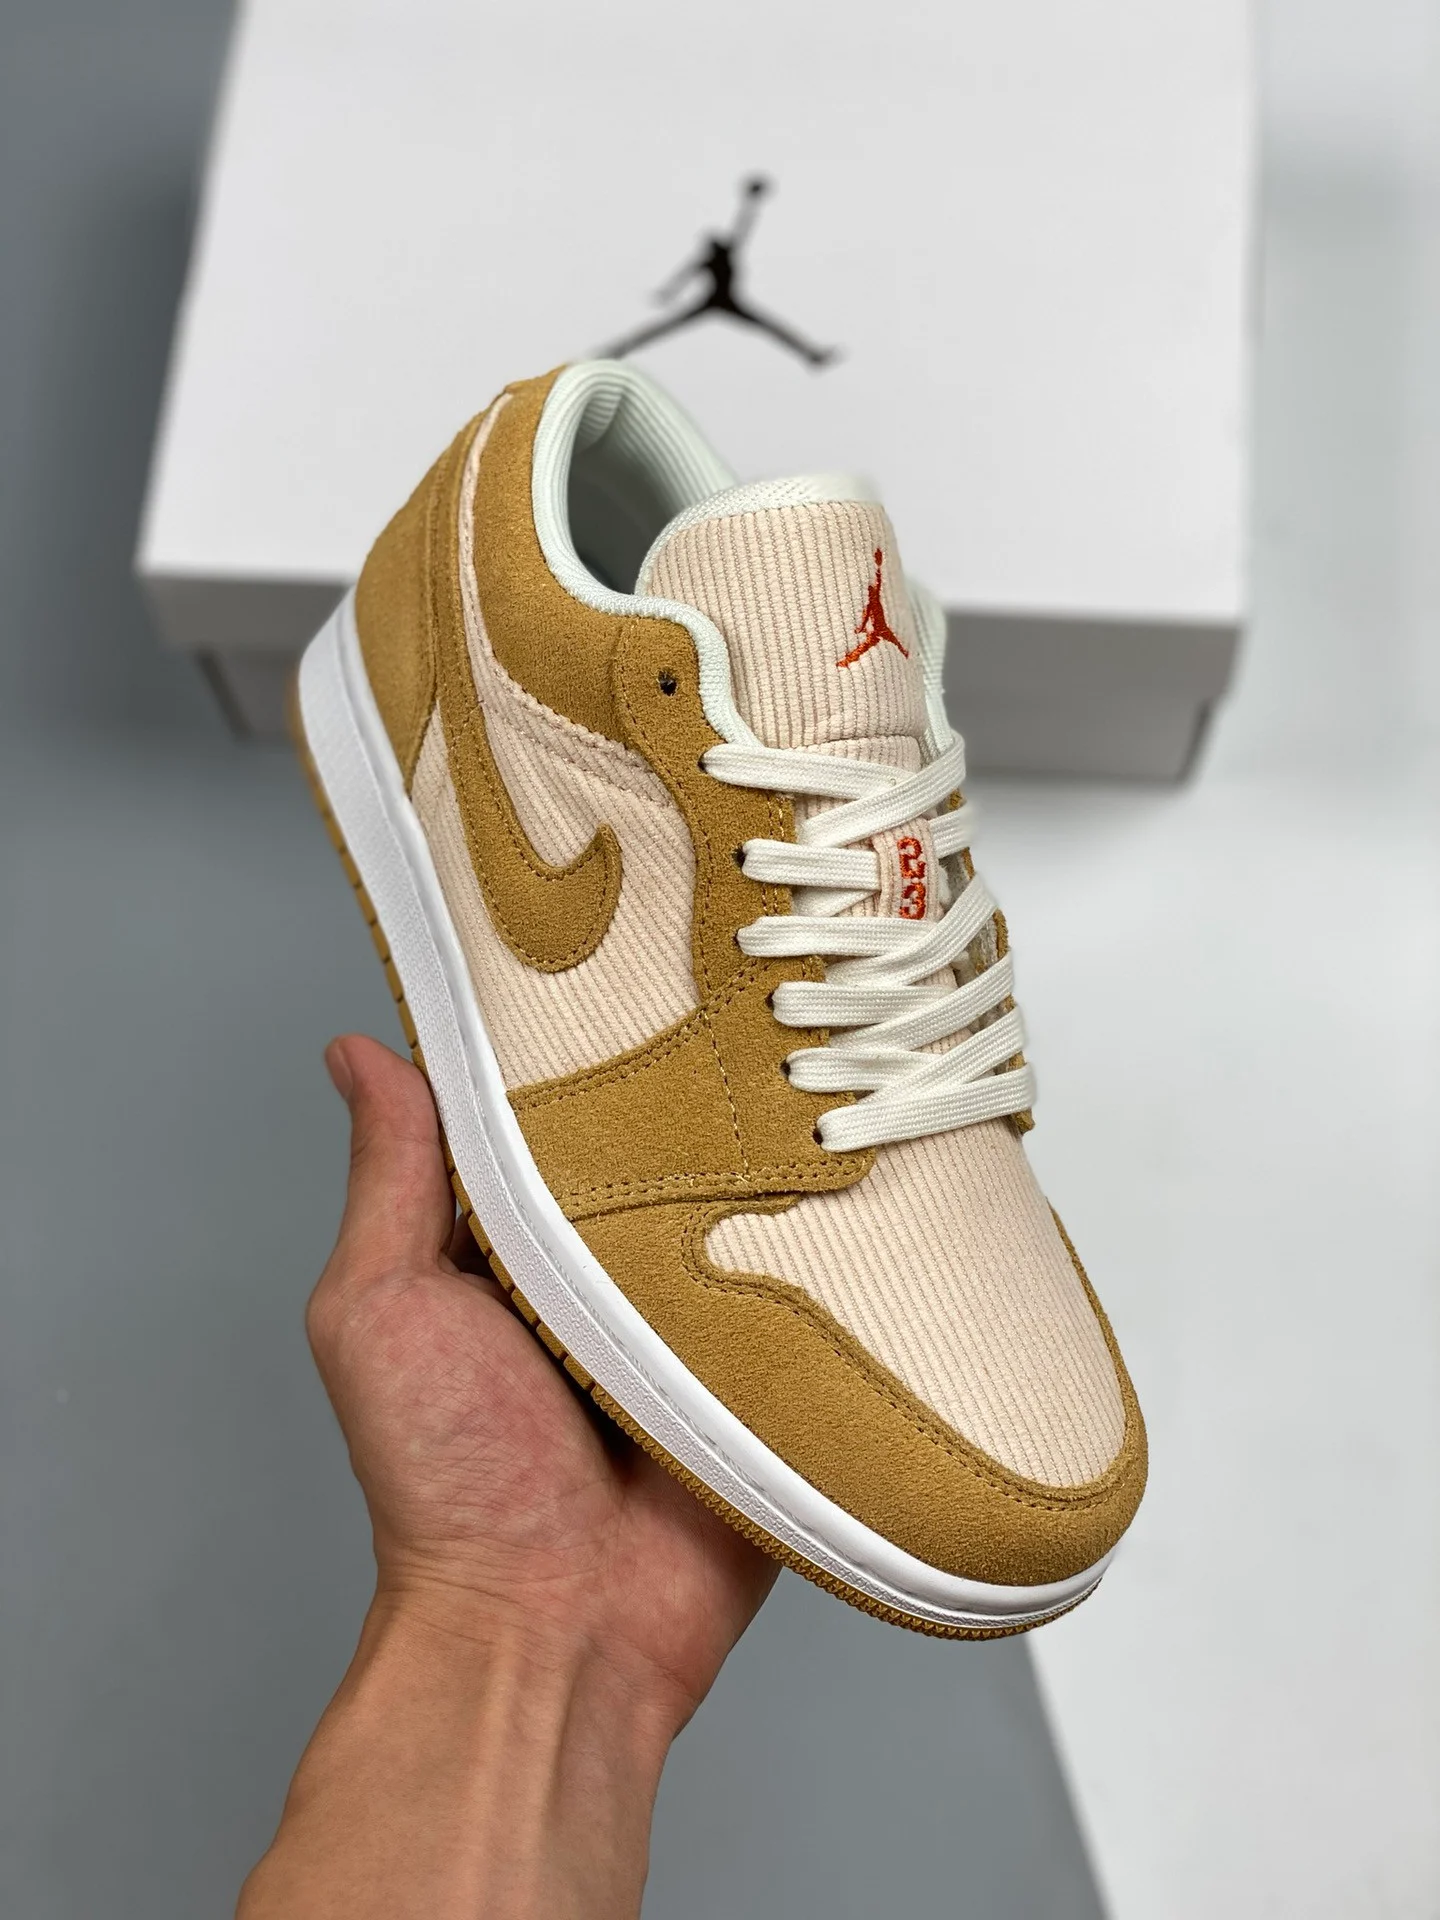 Air Jordan 1 Low Corduroy and Suede DH7820-700 For Sale